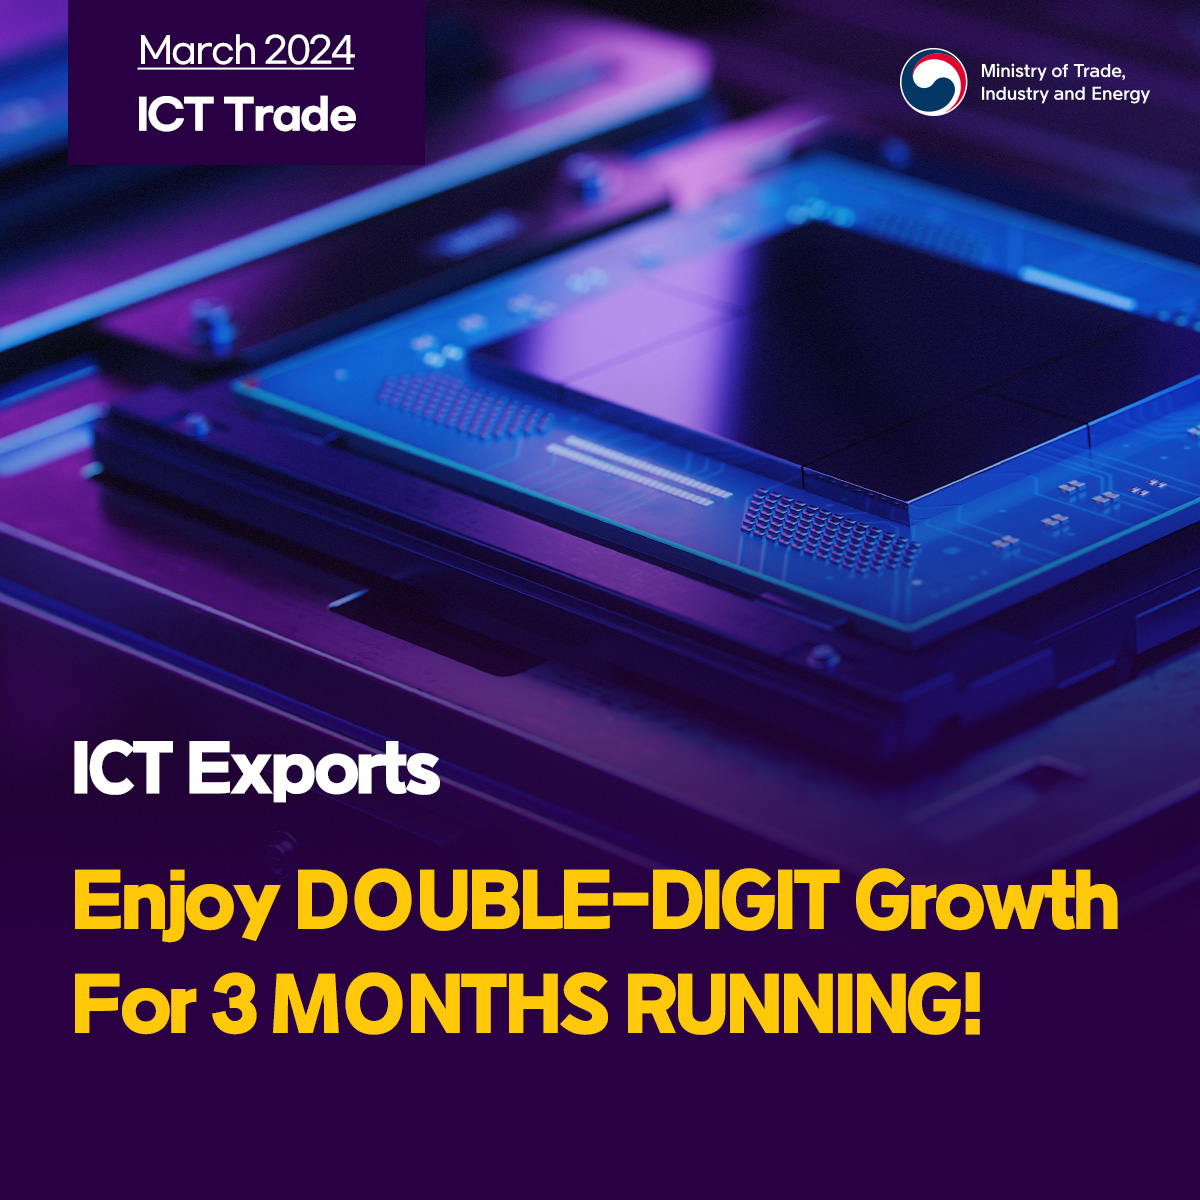 Korea's ICT exports enjoy double-digit growth for 3 months running!